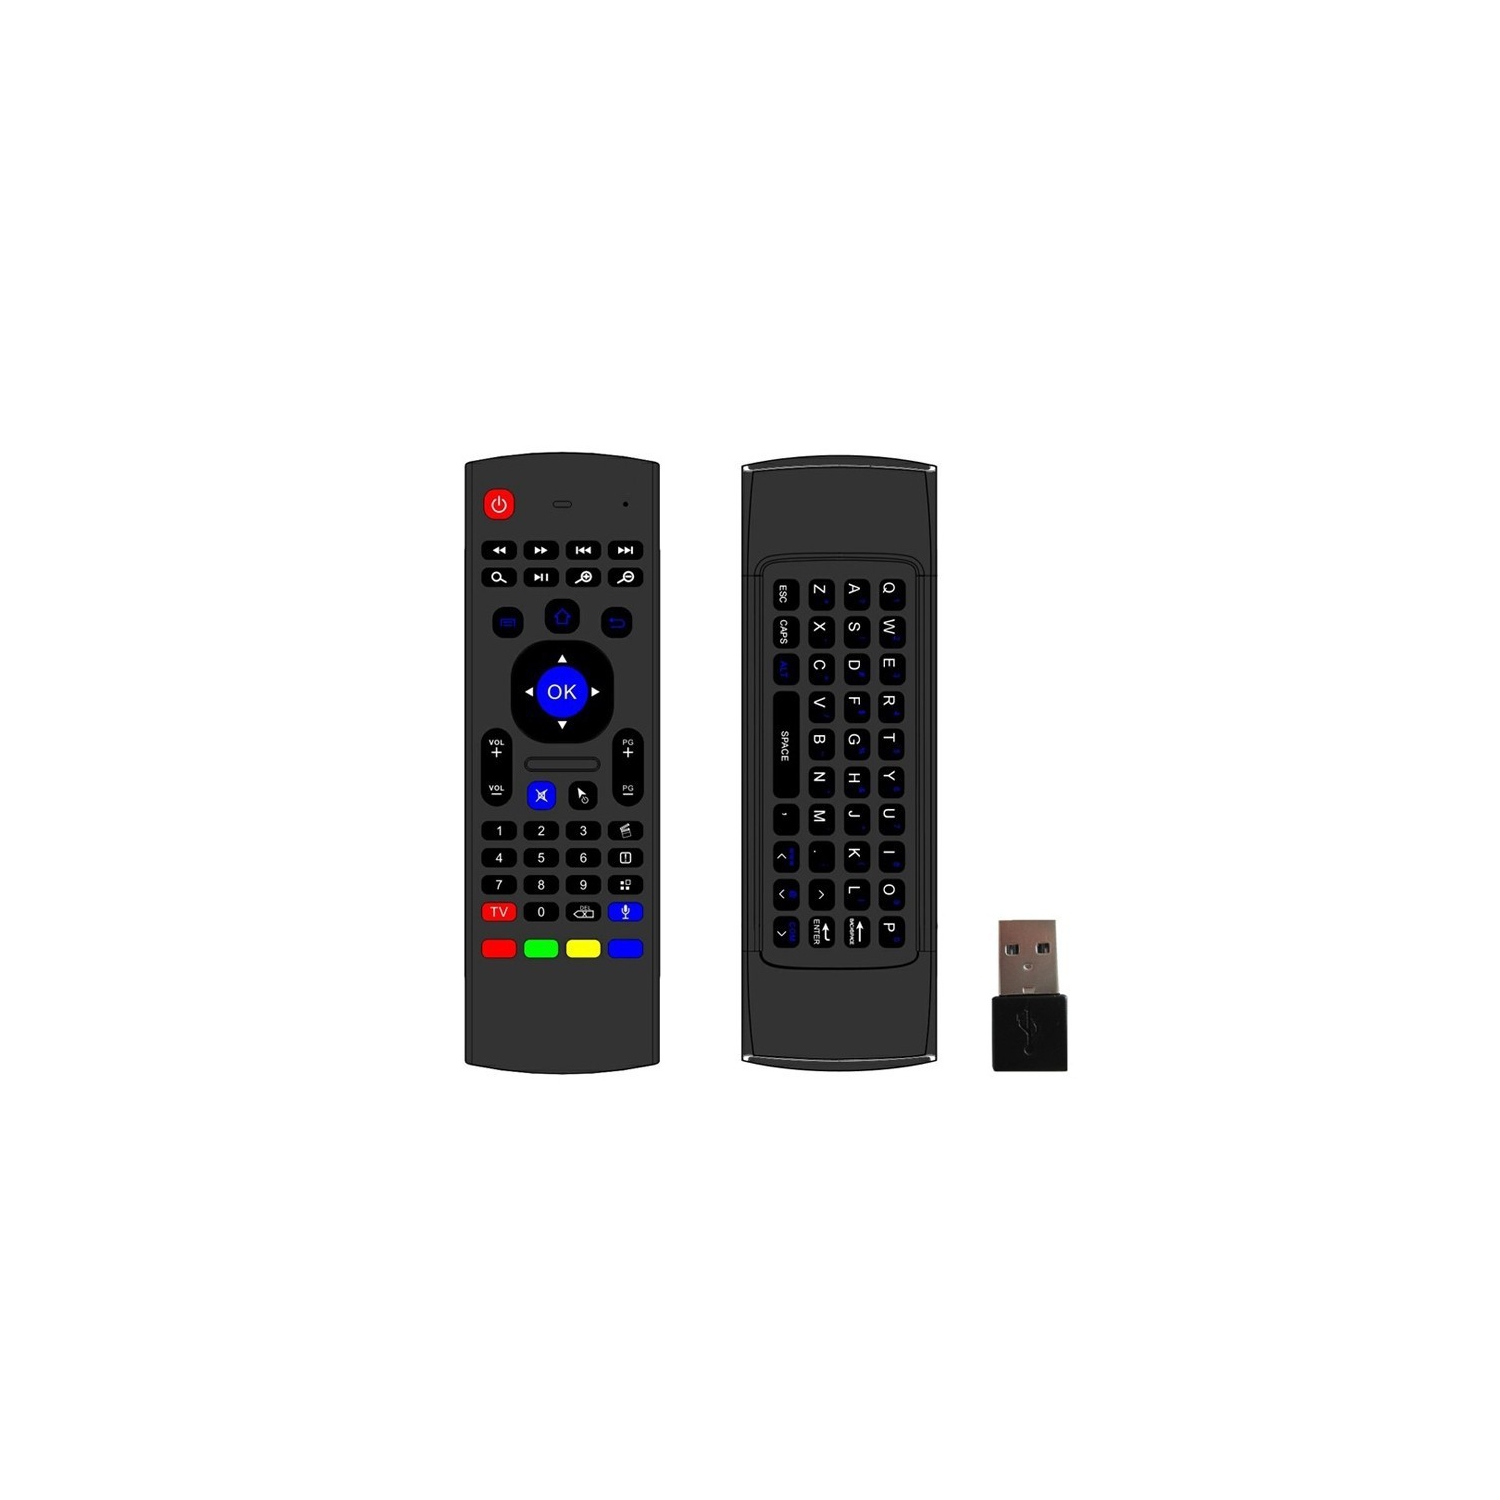 WIRELESS FULL KEYBOARD AIR MOUSE REMOTE CONTROL FOR SMART TV / ANDROID BOX / TV DONGLE / SMART PHONE / TABLET PC